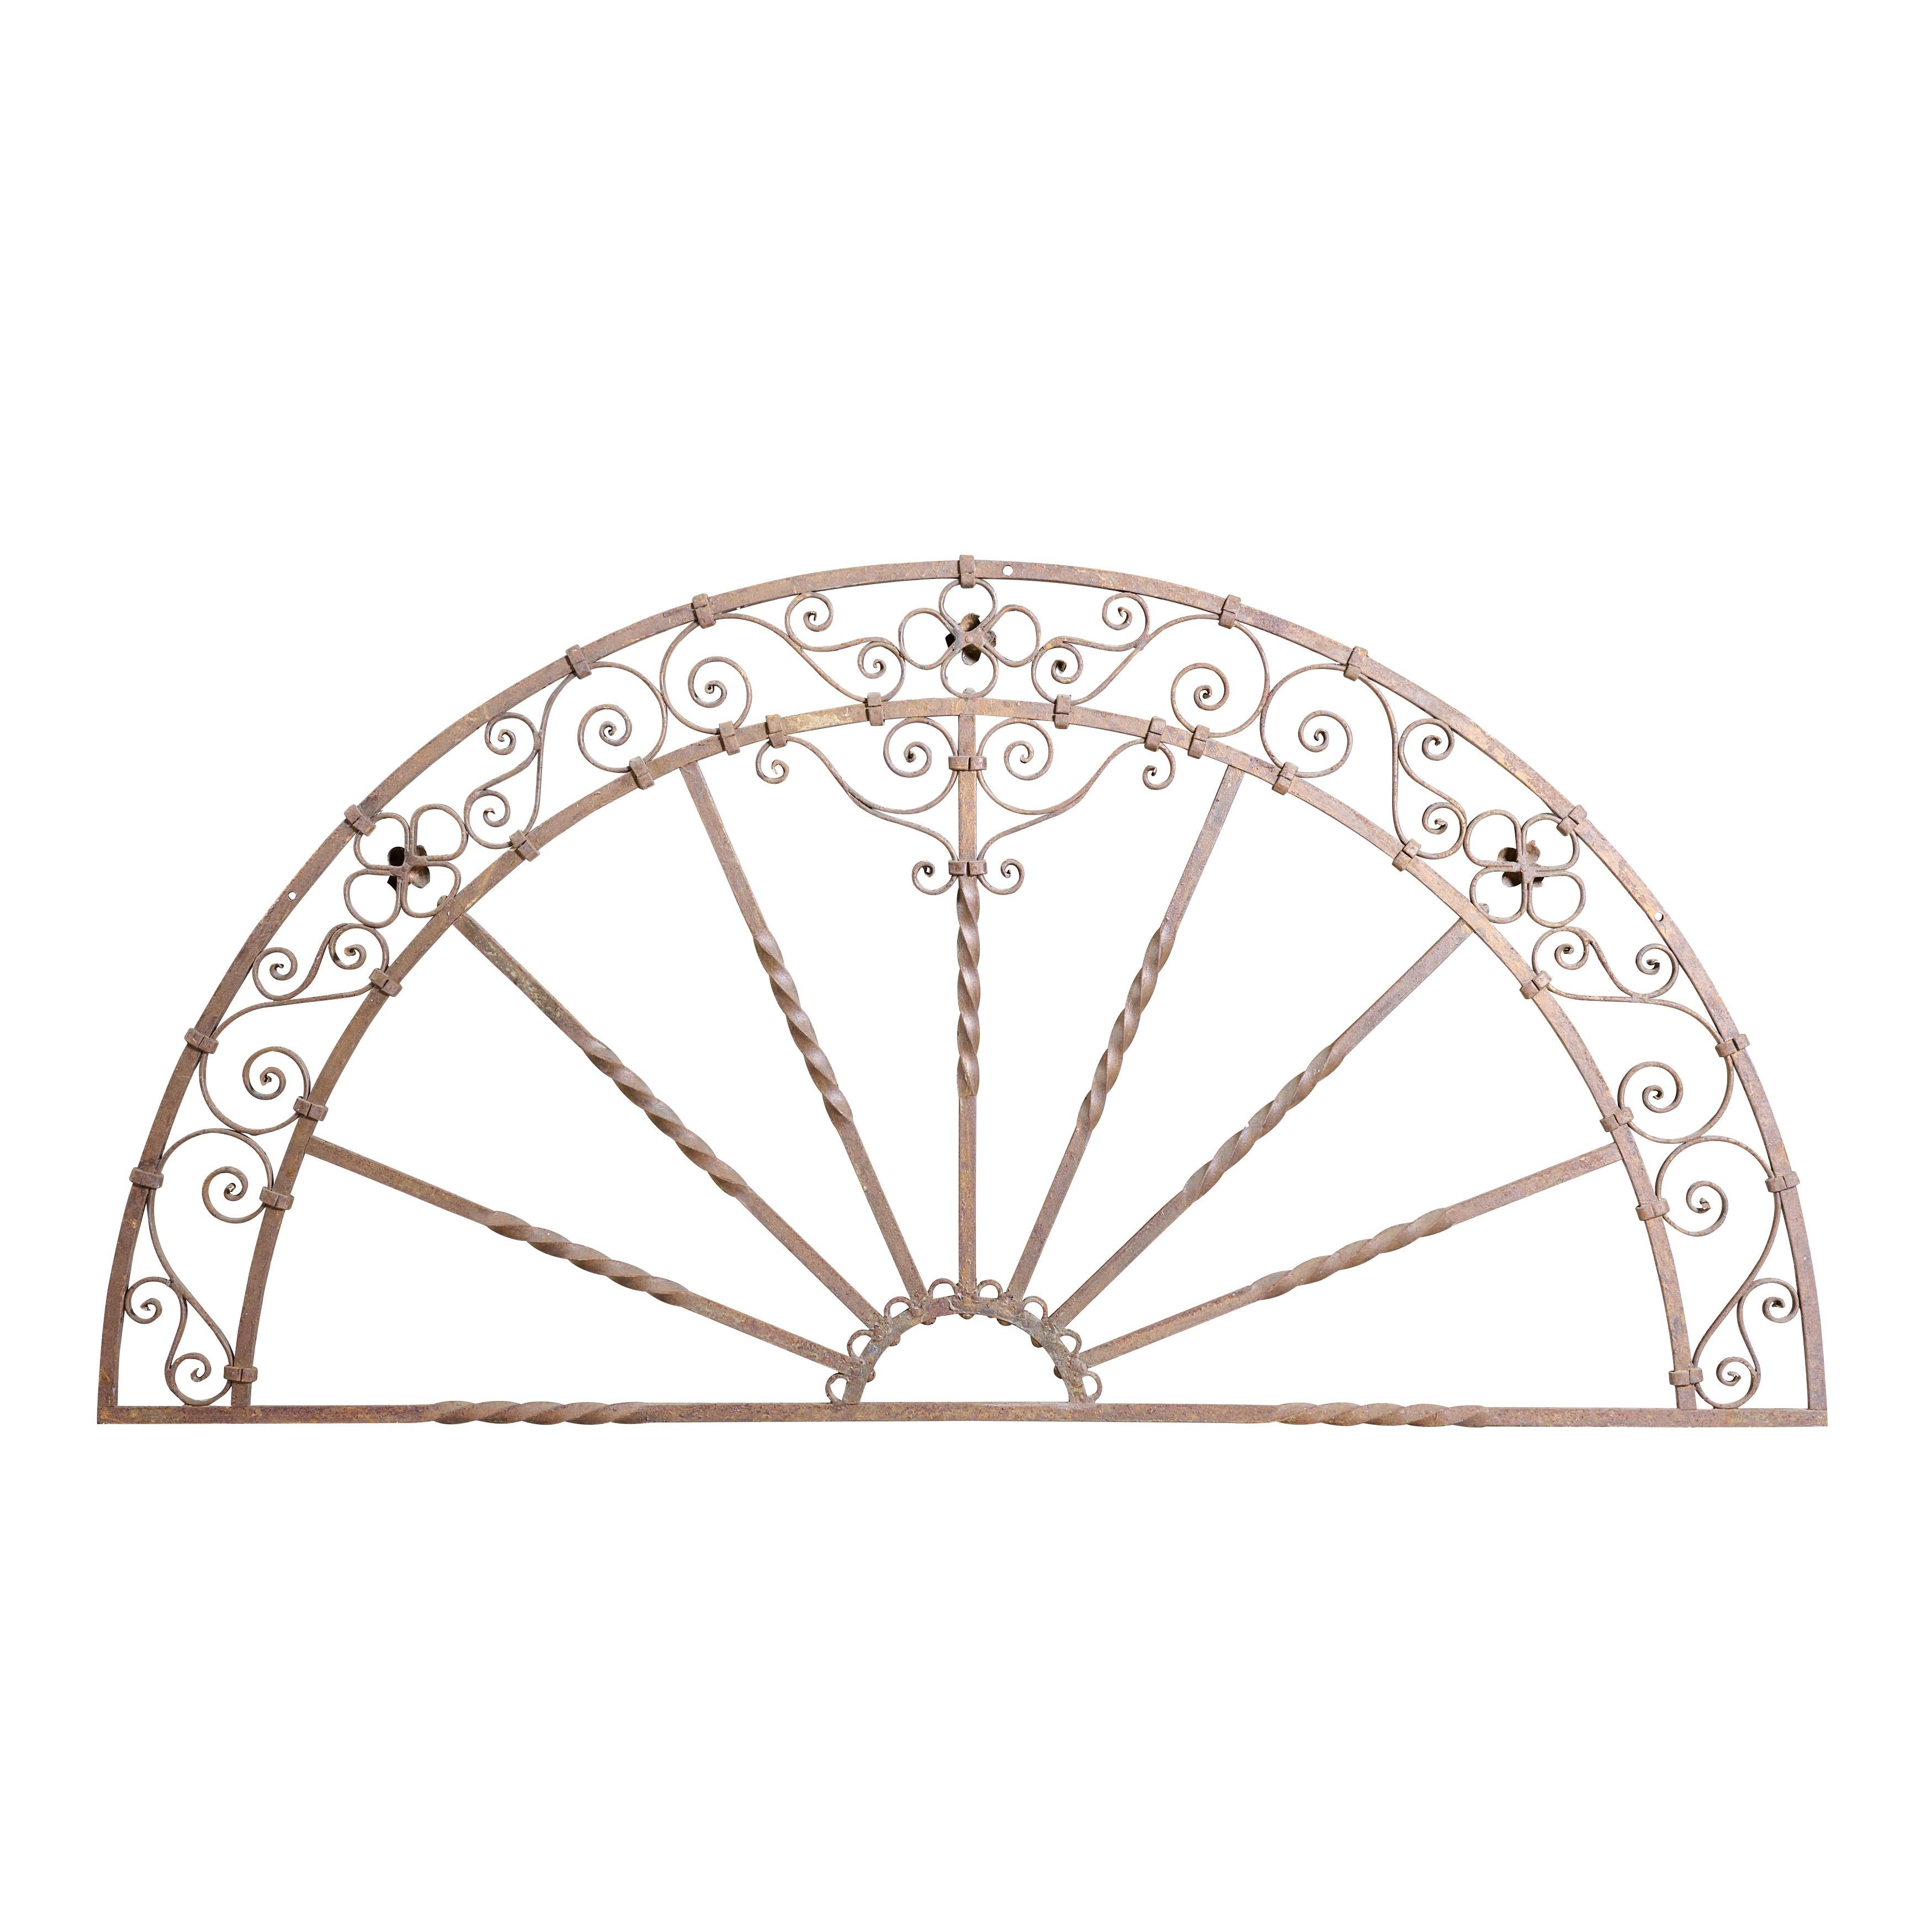 American Decorative Wrought Iron Grill For Sale